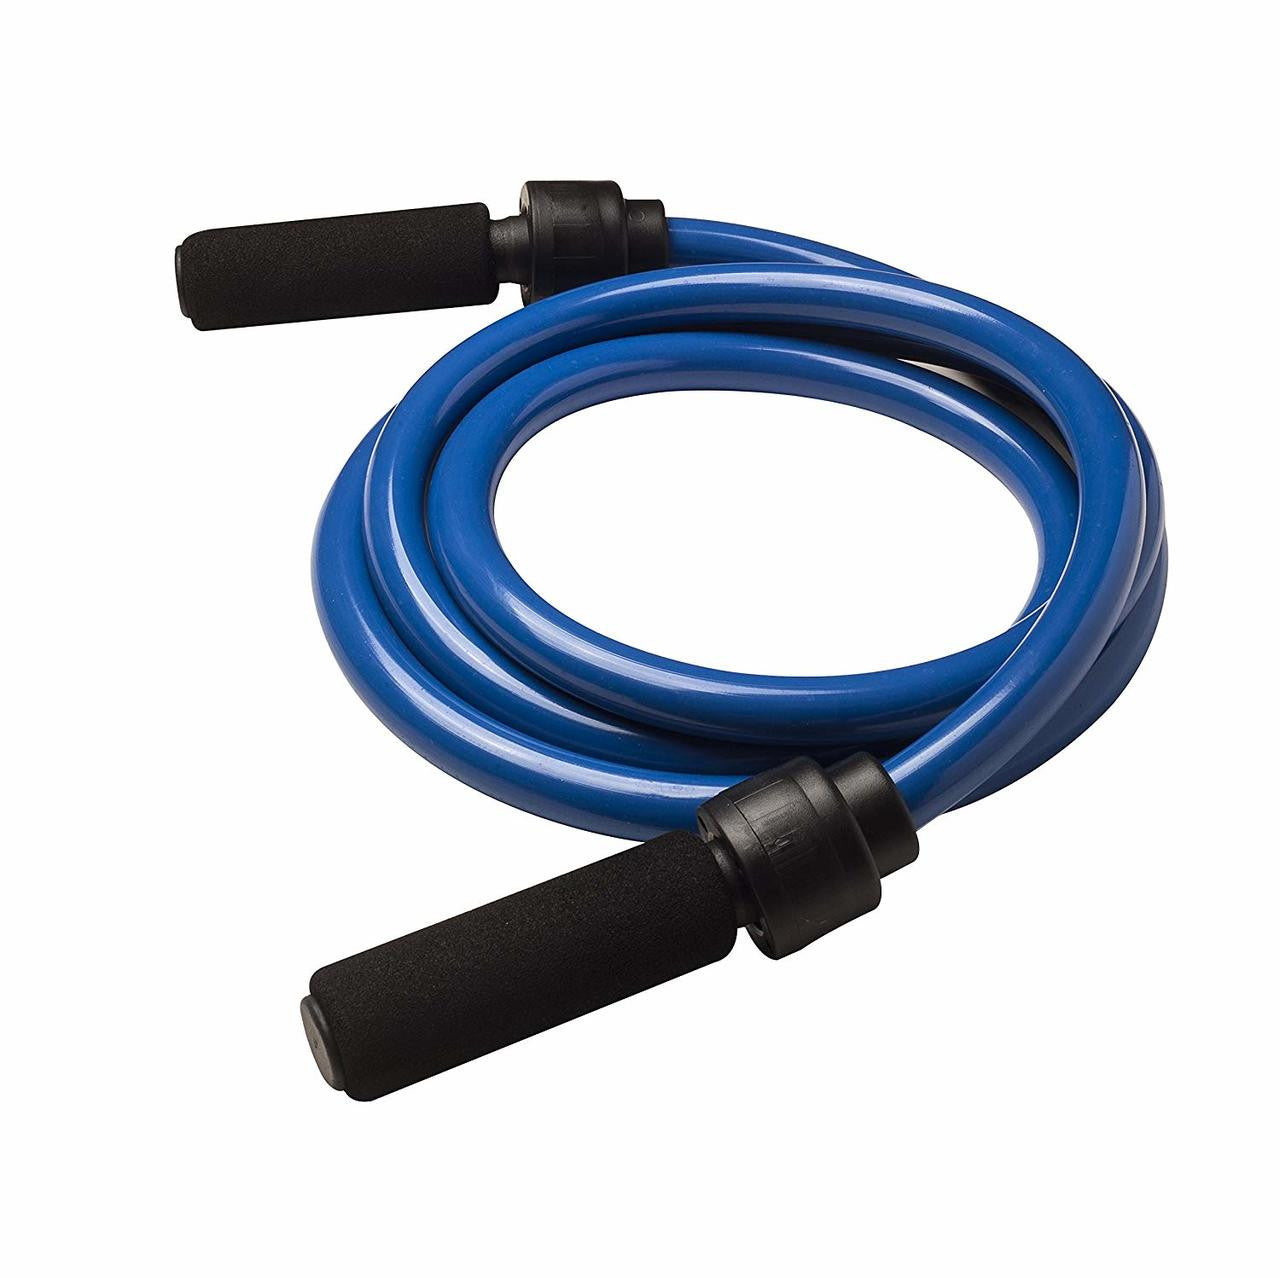 4 lb weighted jump rope